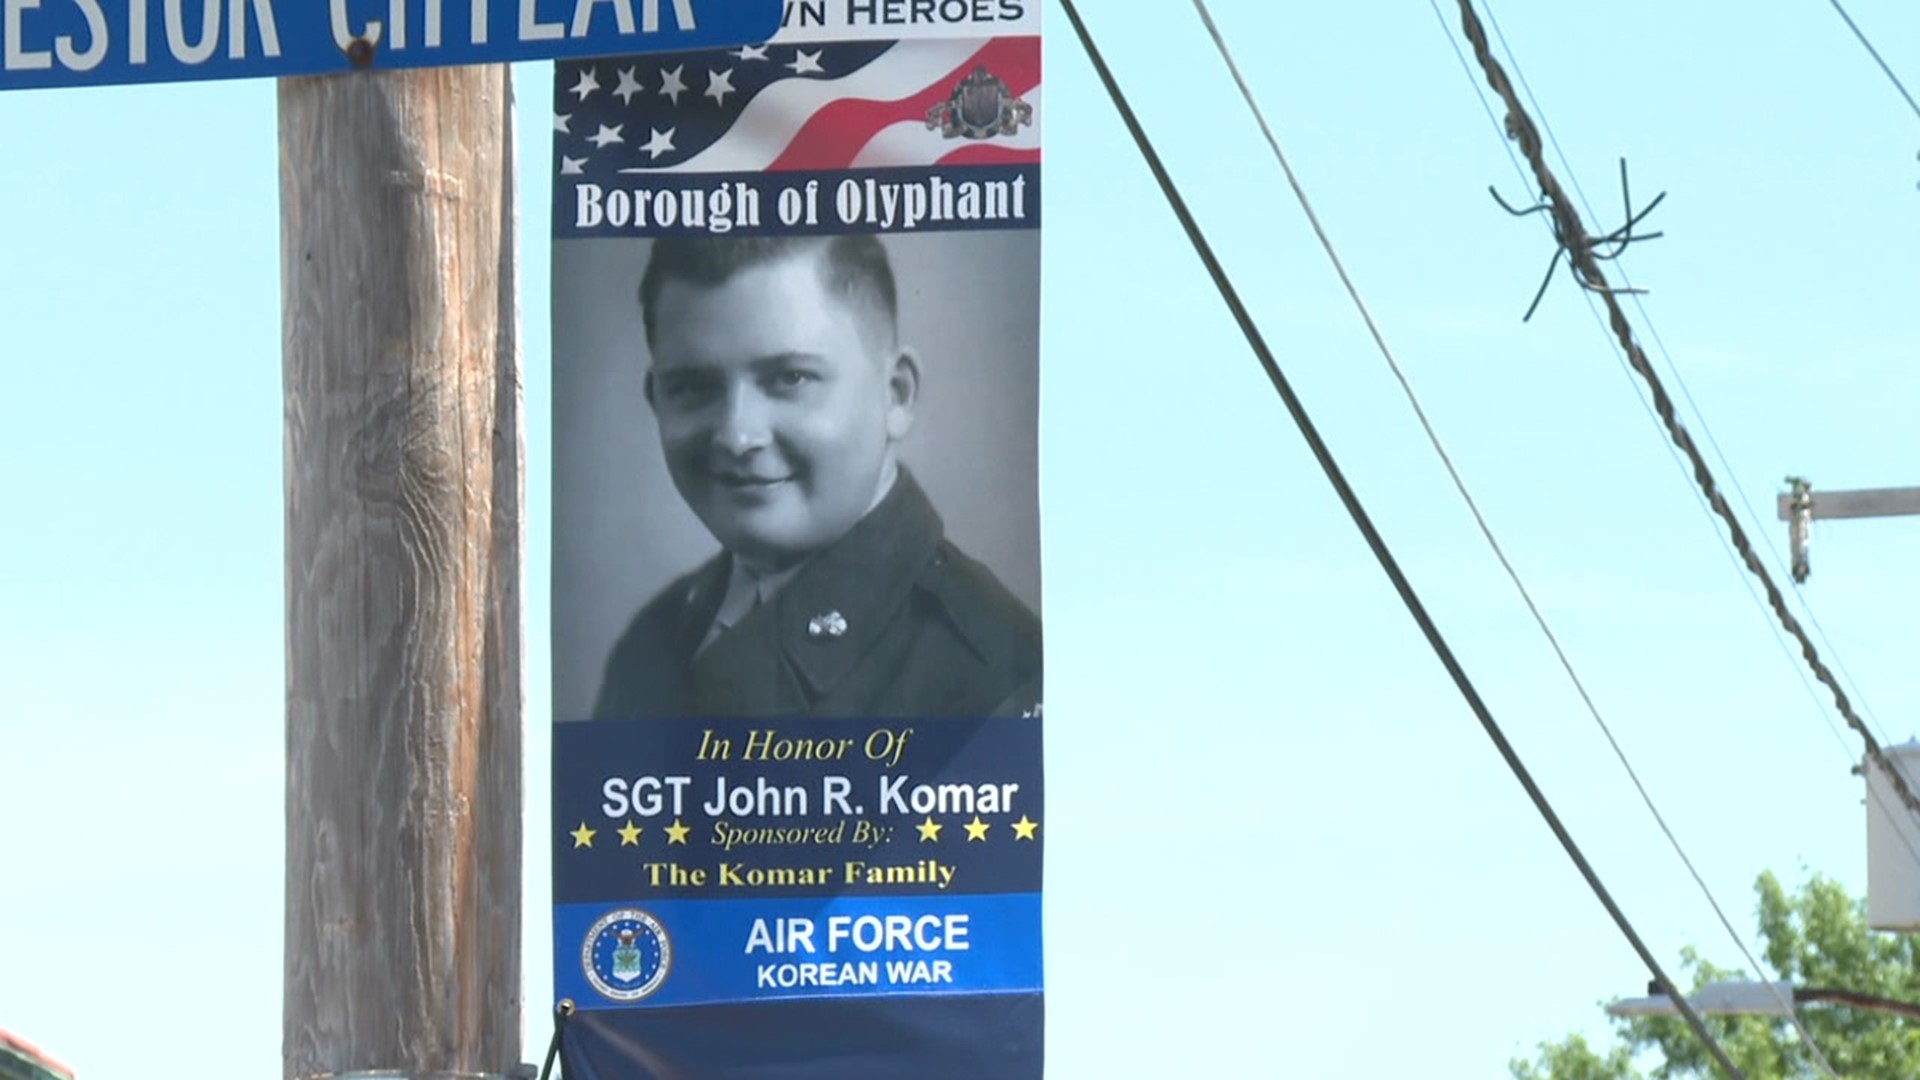 Nine more Hometown Heroes were recognized in Olyphant.